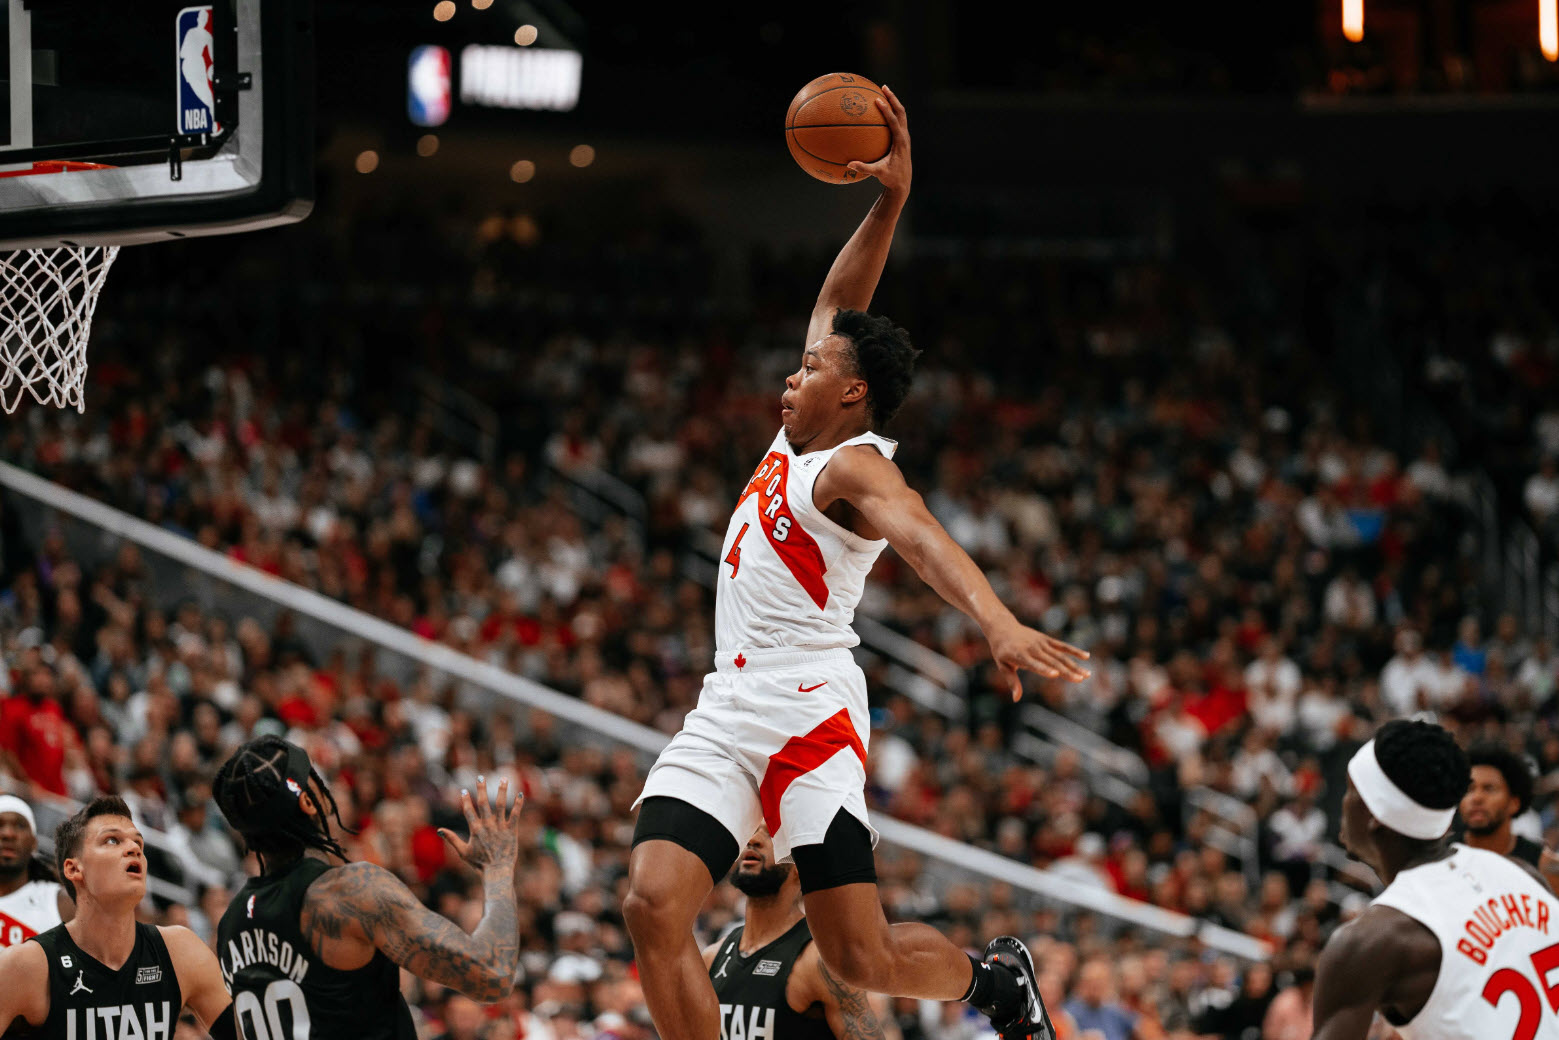 RAPTORS FAMILY: KYLE LOWRY LEADERSHIP WAS THE DIFFERENCE MAKER | MIAMI VS KNICKS RECAP